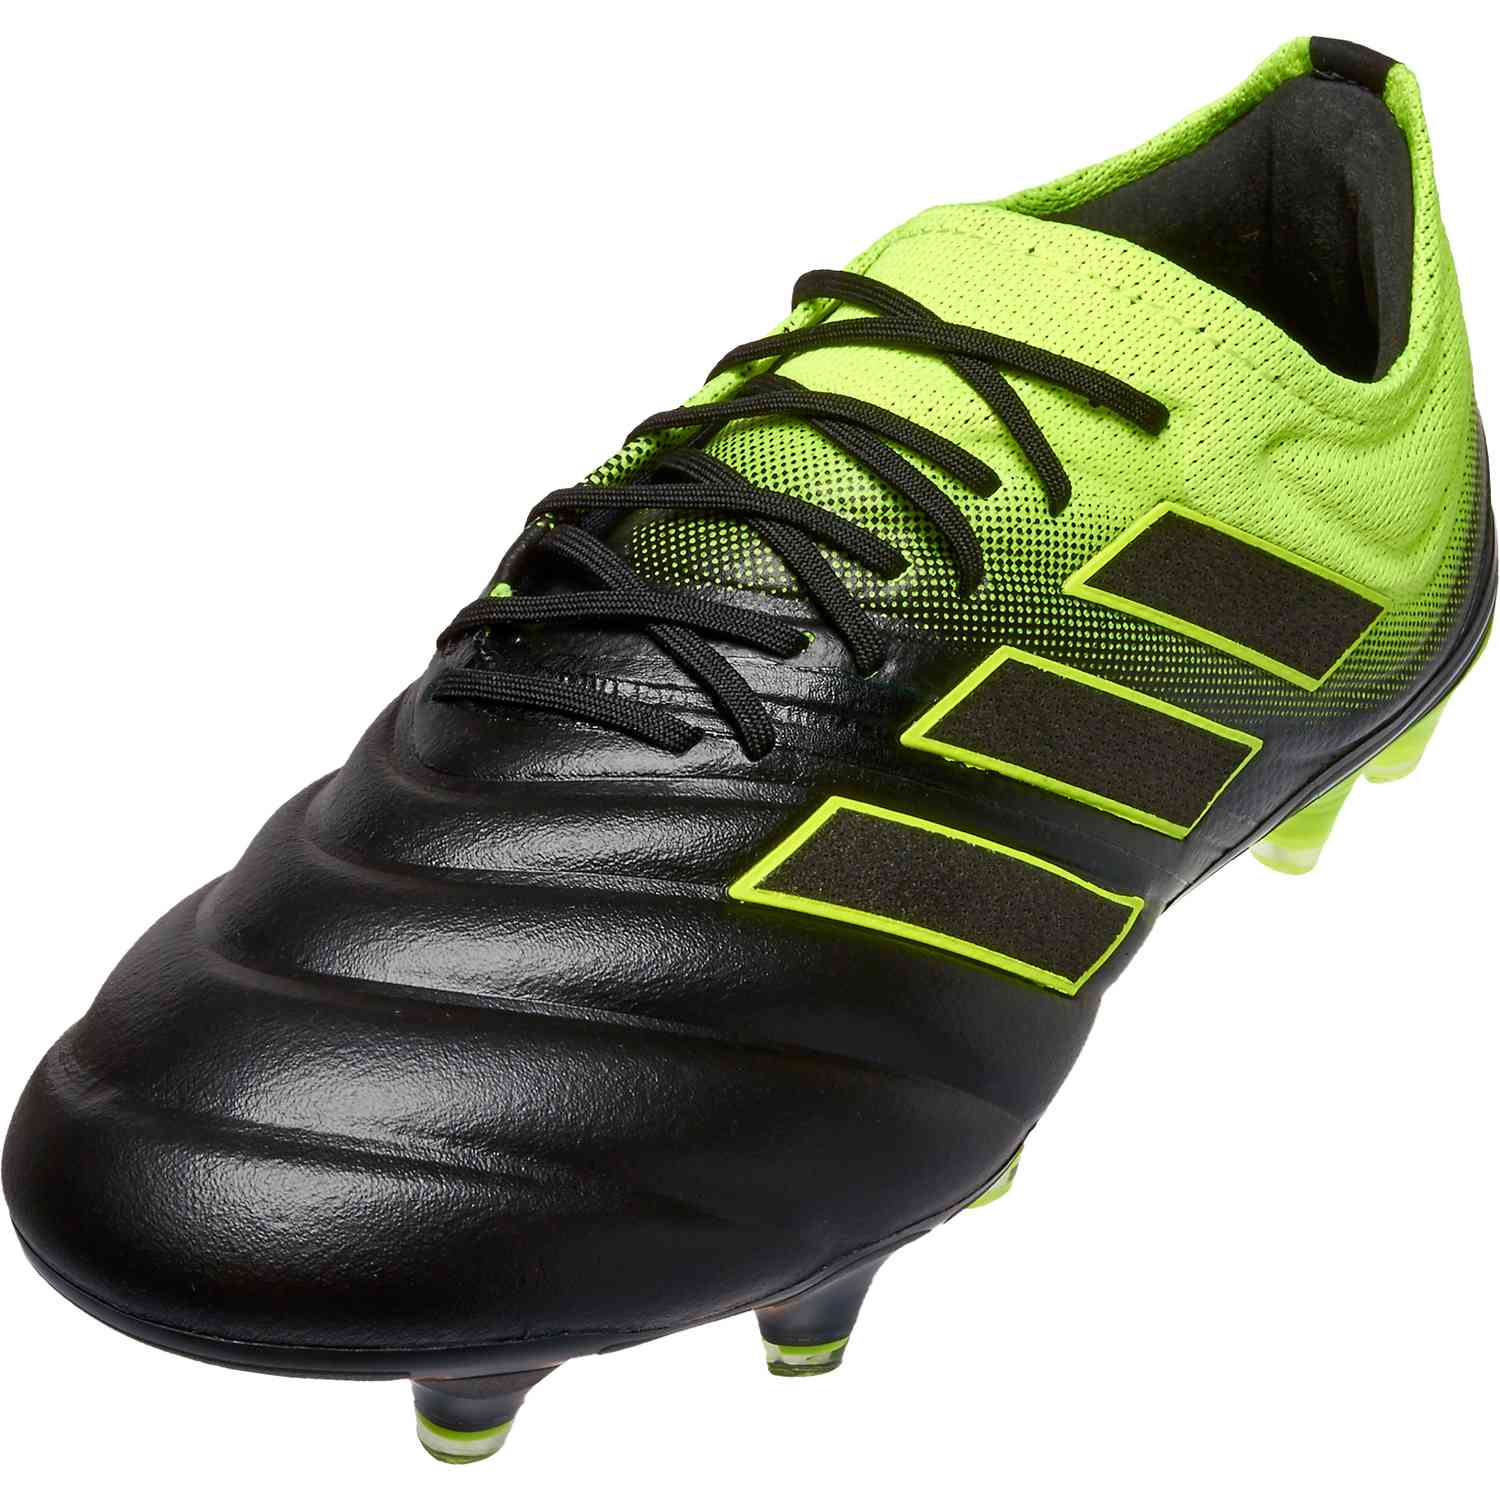 adidas copa 19.1 firm ground cleats